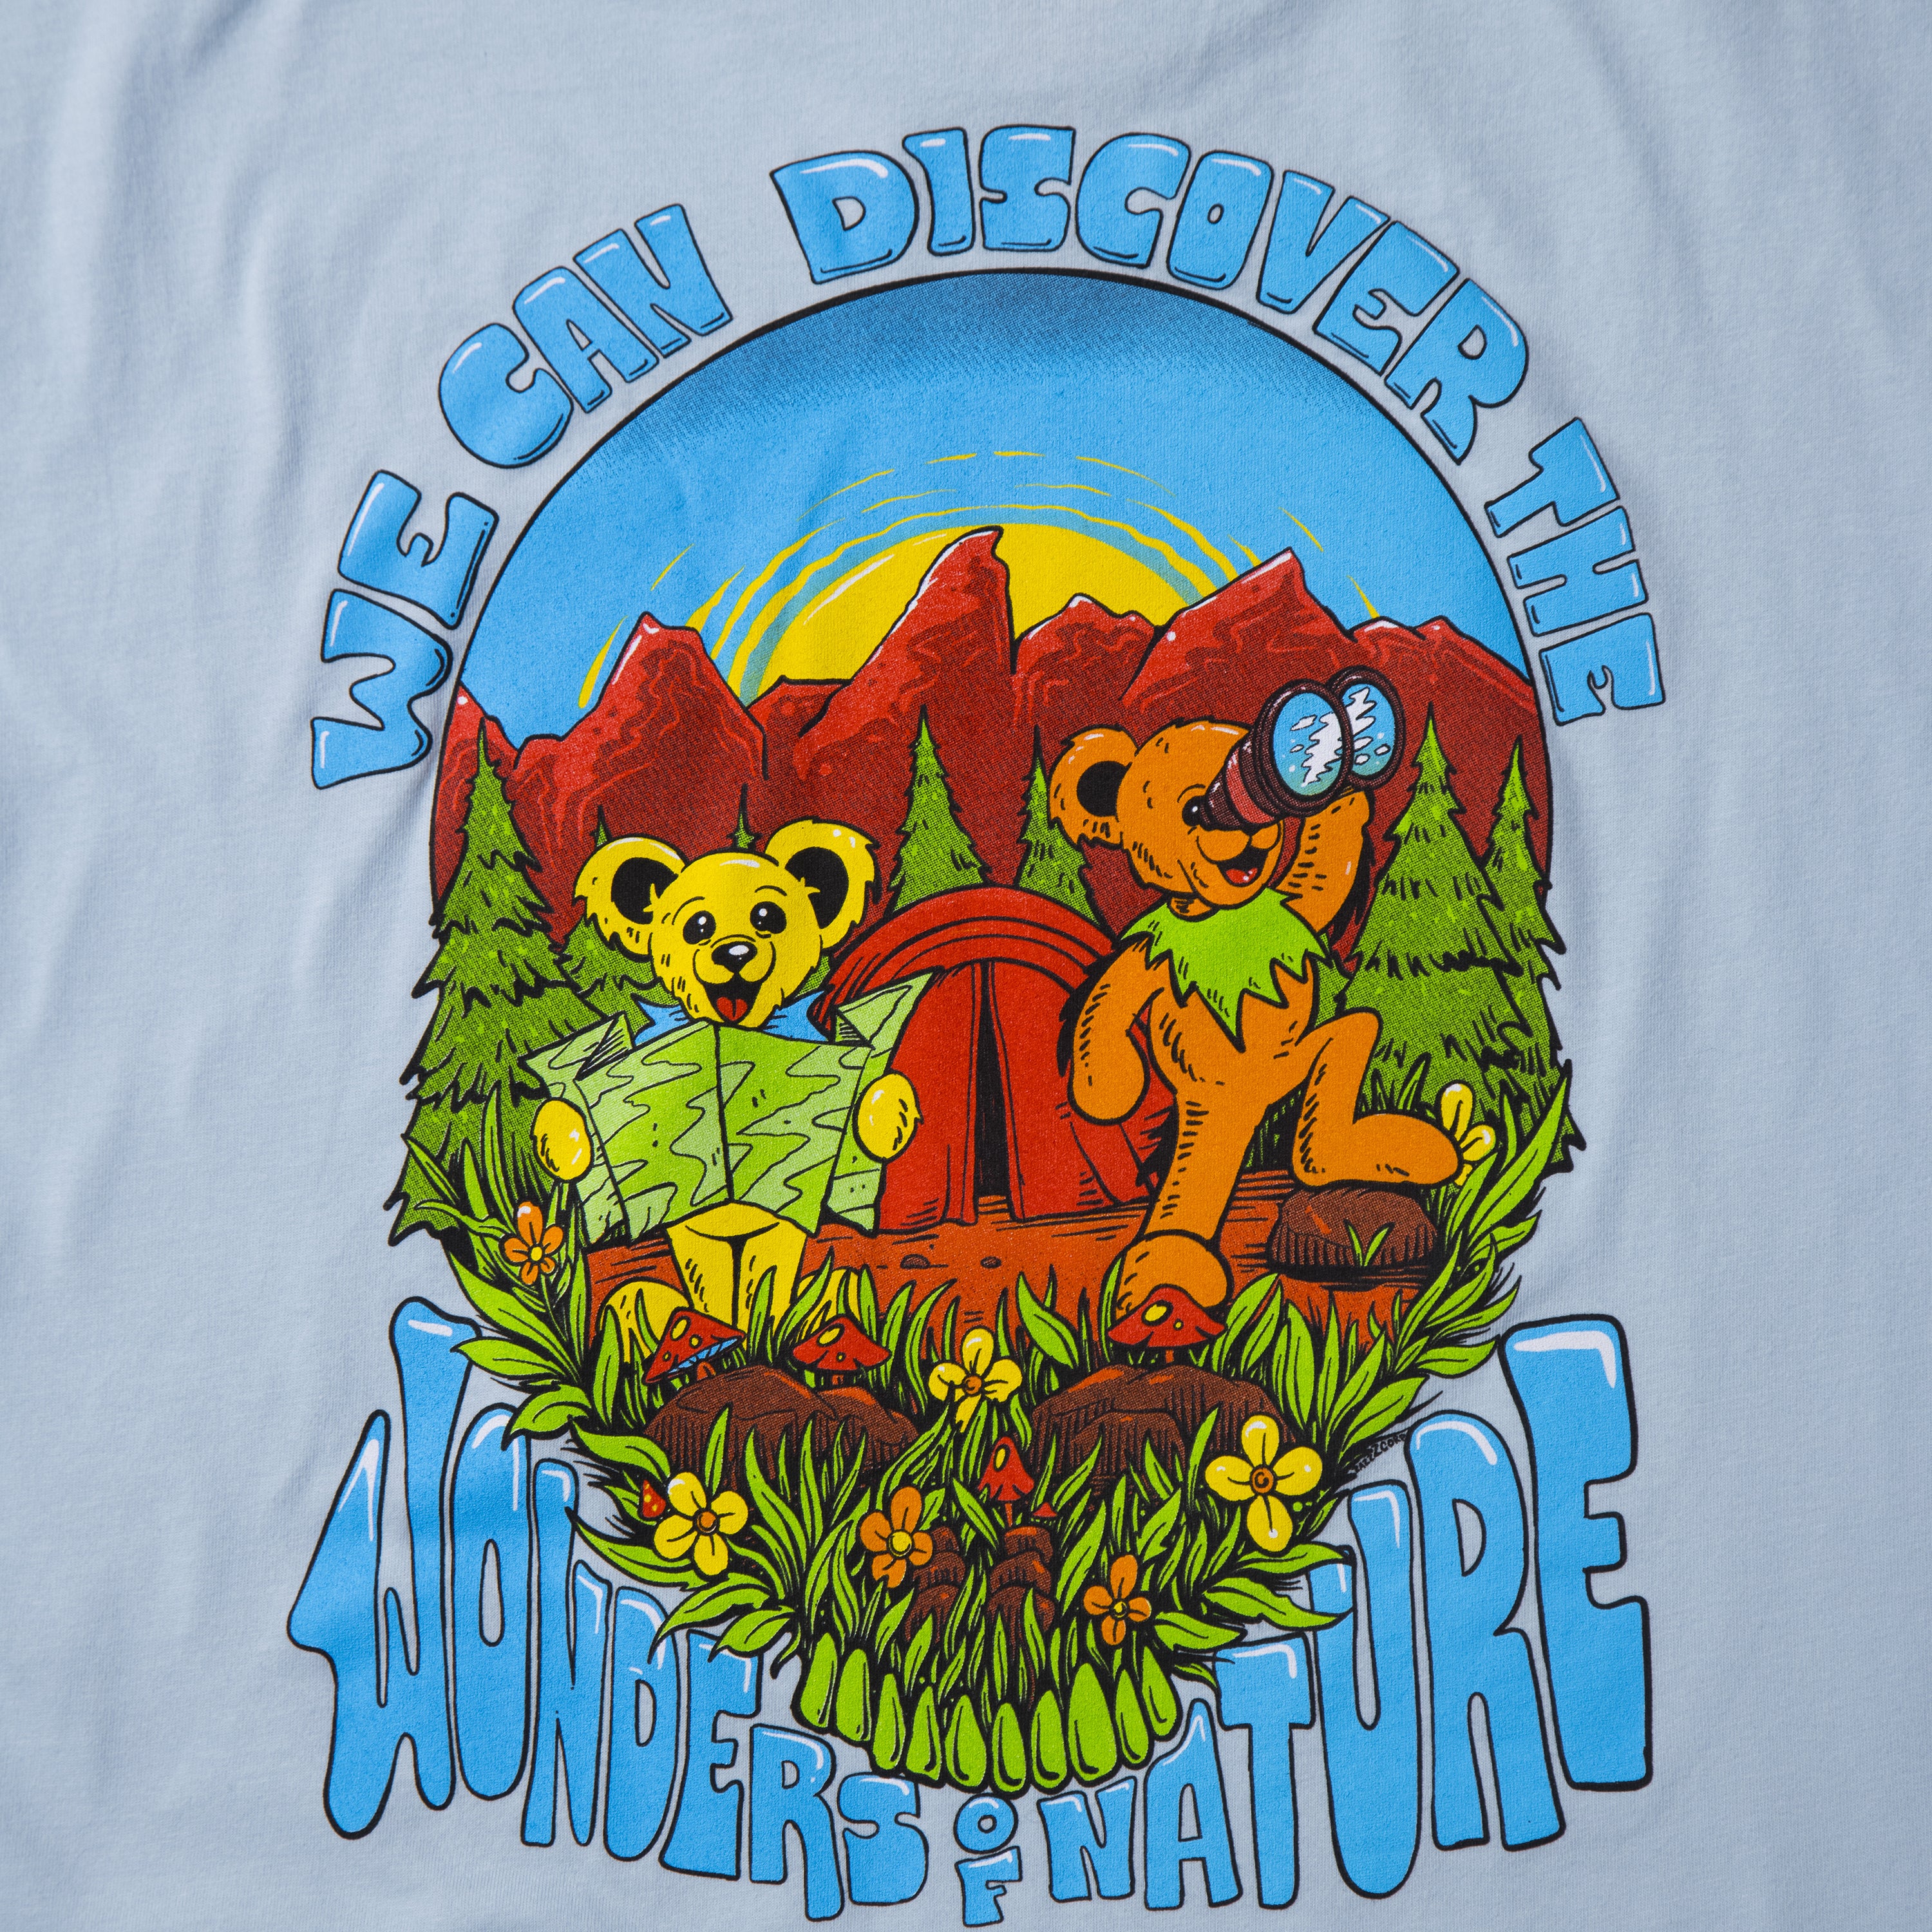 Grateful Dead x TGR “We Can Discover the Wonders of Nature” Solid Tee by Zazz Corp